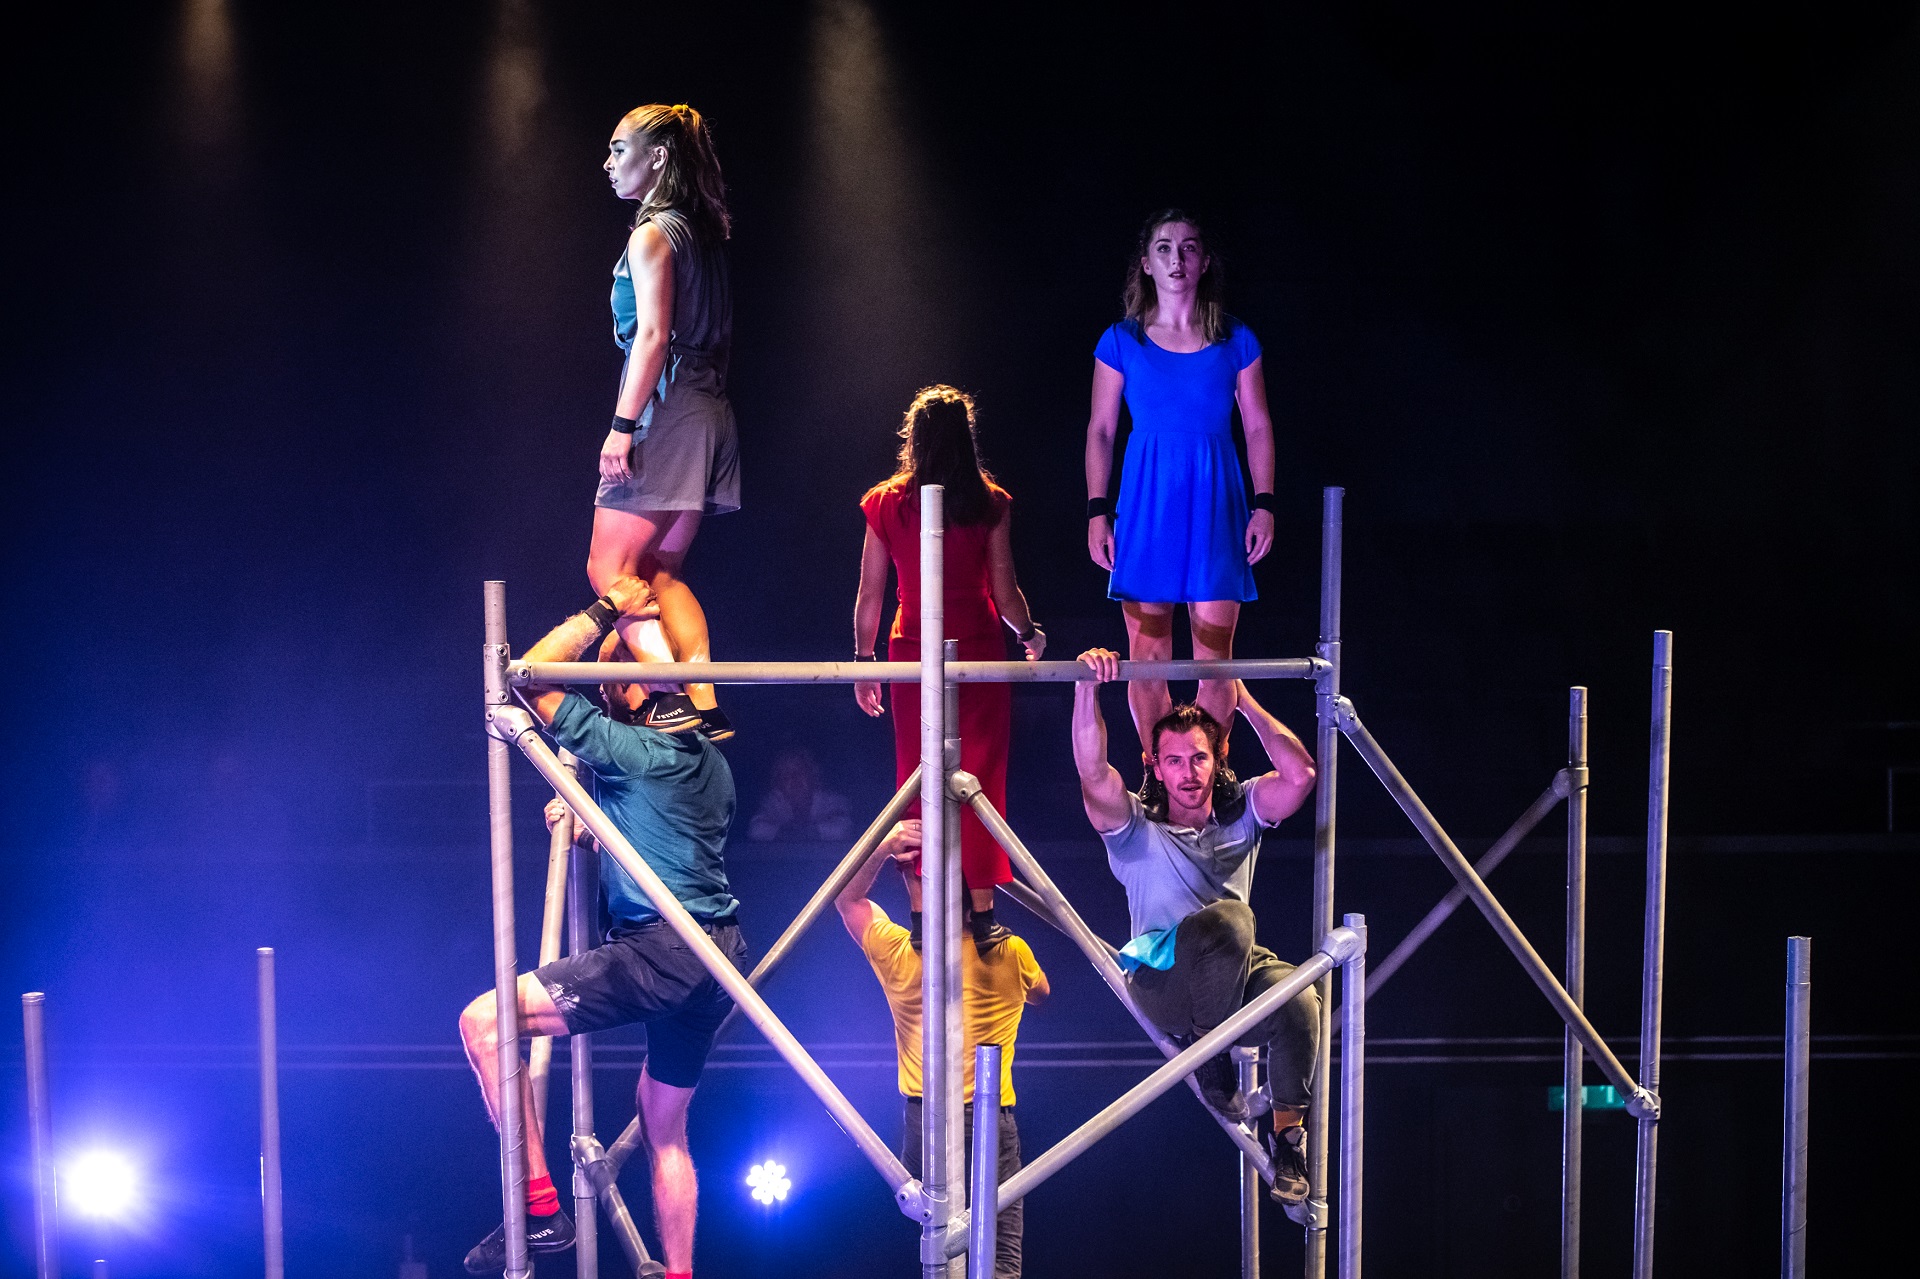 Image of performers standing on different level metal beams.